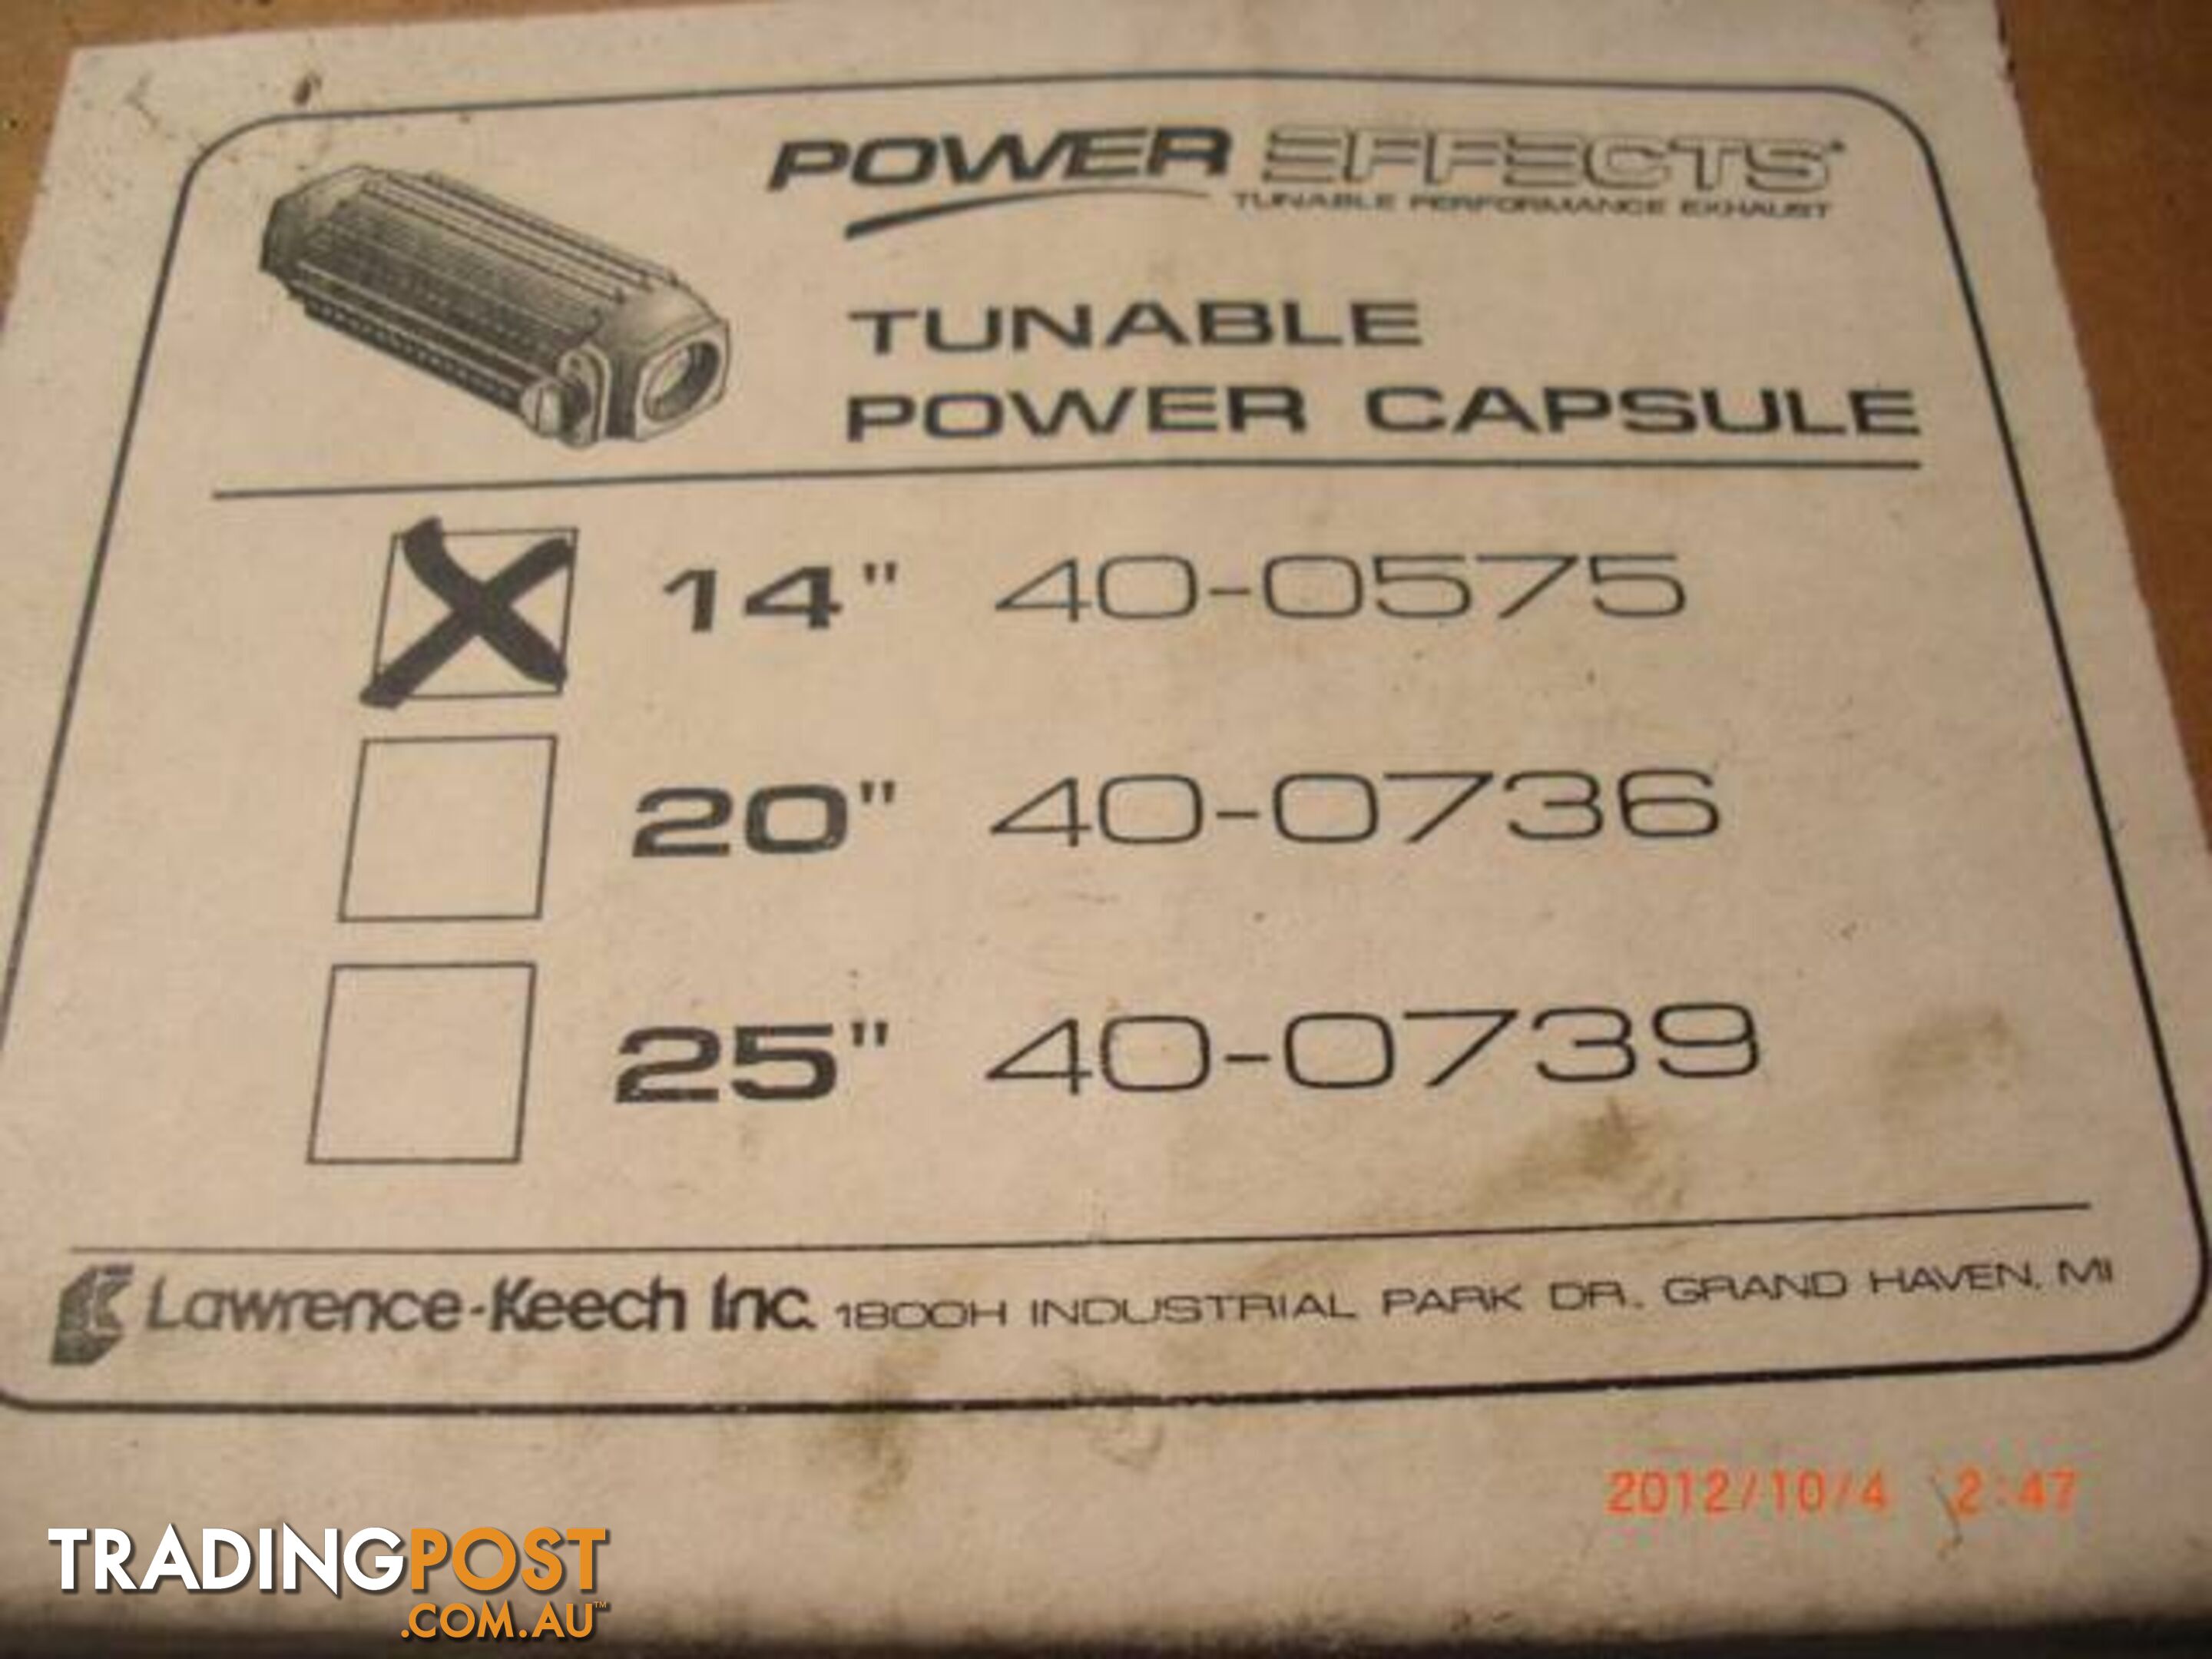 2X POWER EFFECTS TURNABLE POWER CAPSULE EXHAUSTS 3 INCH BORE..